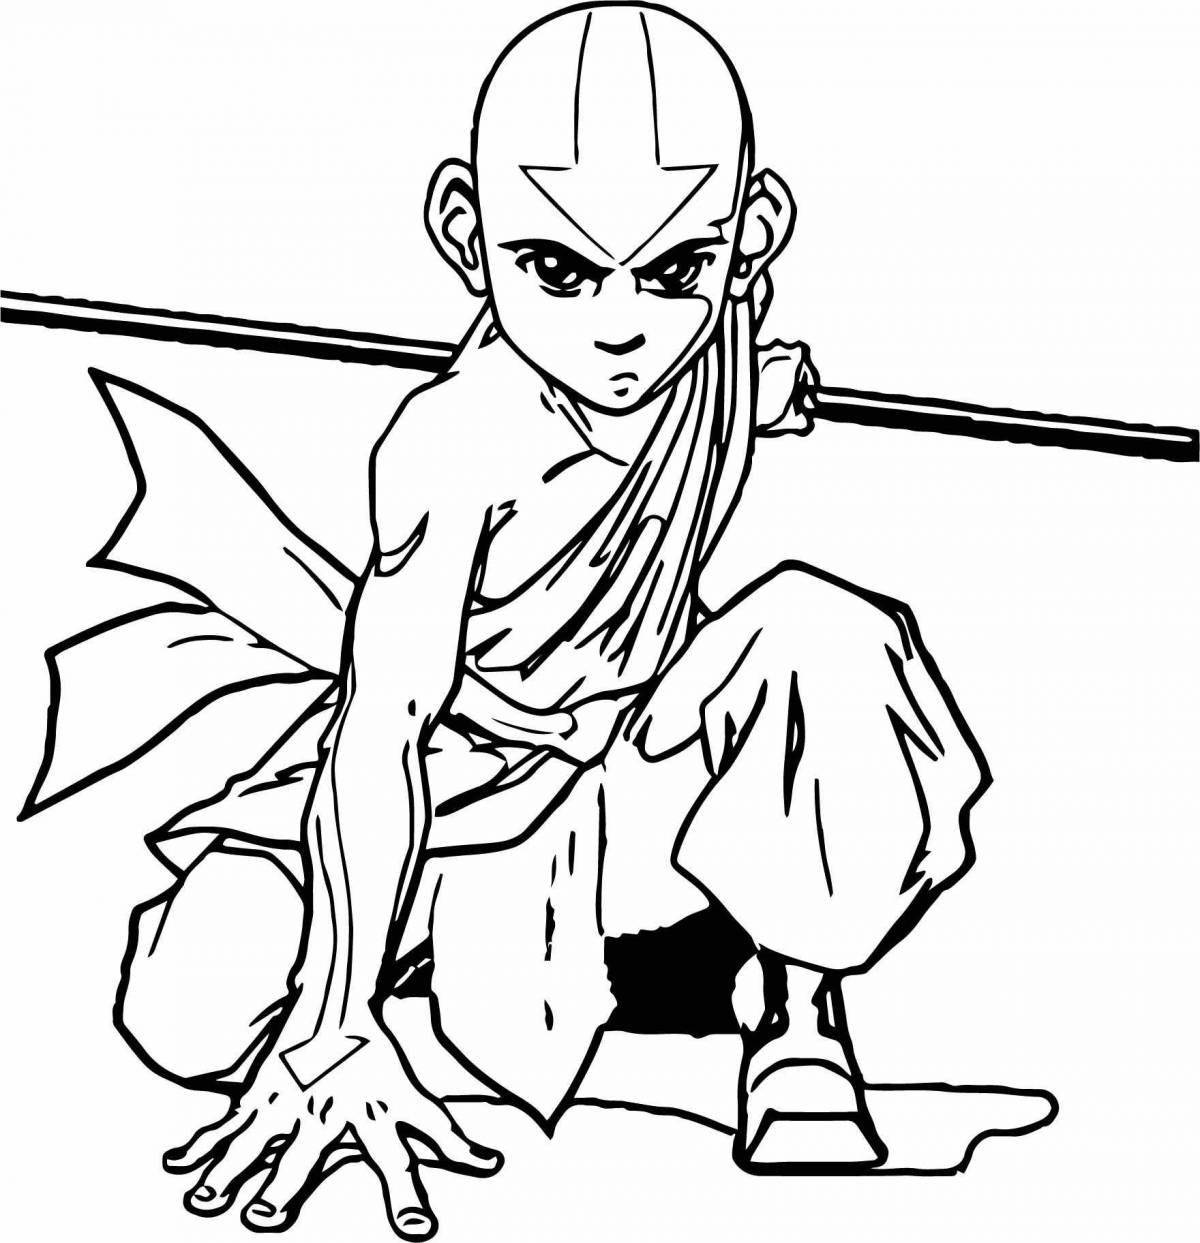 Adorable avatar coloring page